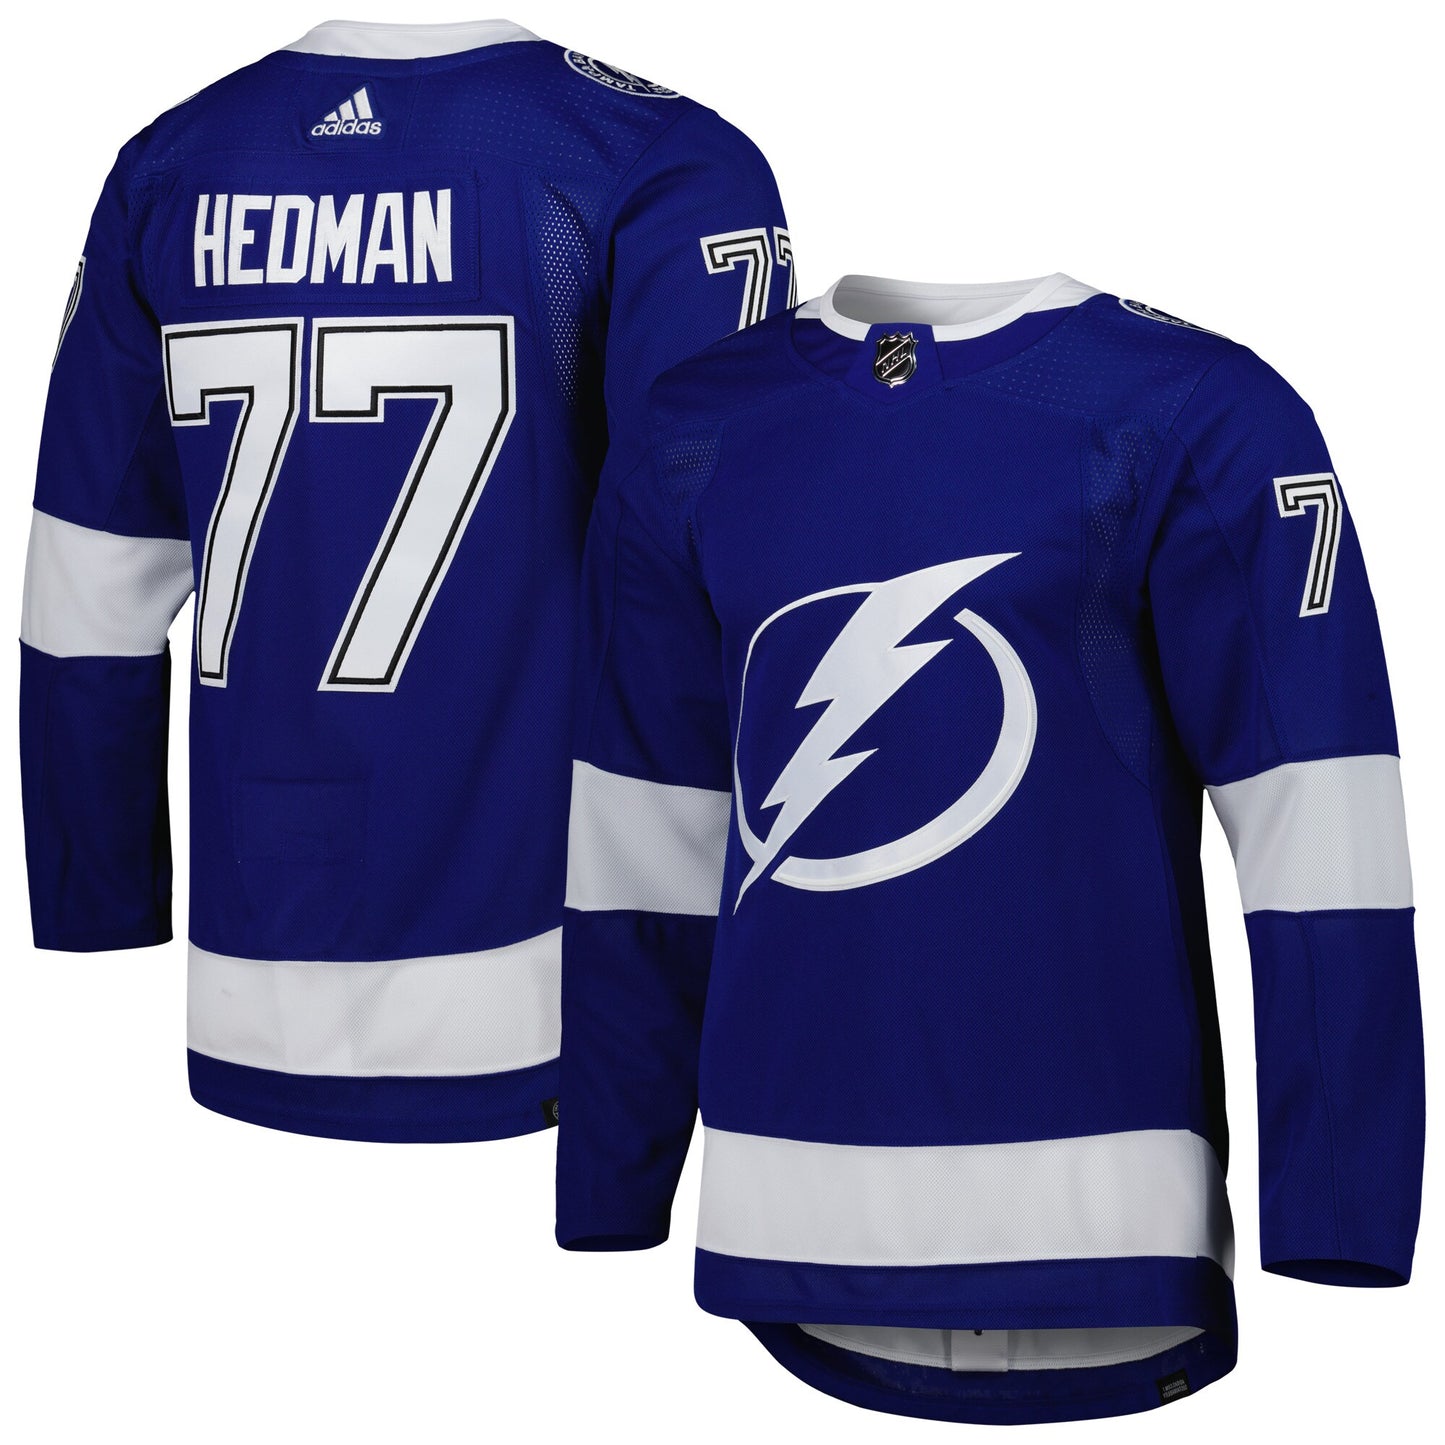 Victor Hedman Tampa Bay Lightning adidas Home Primegreen Authentic Pro Player Jersey - Blue